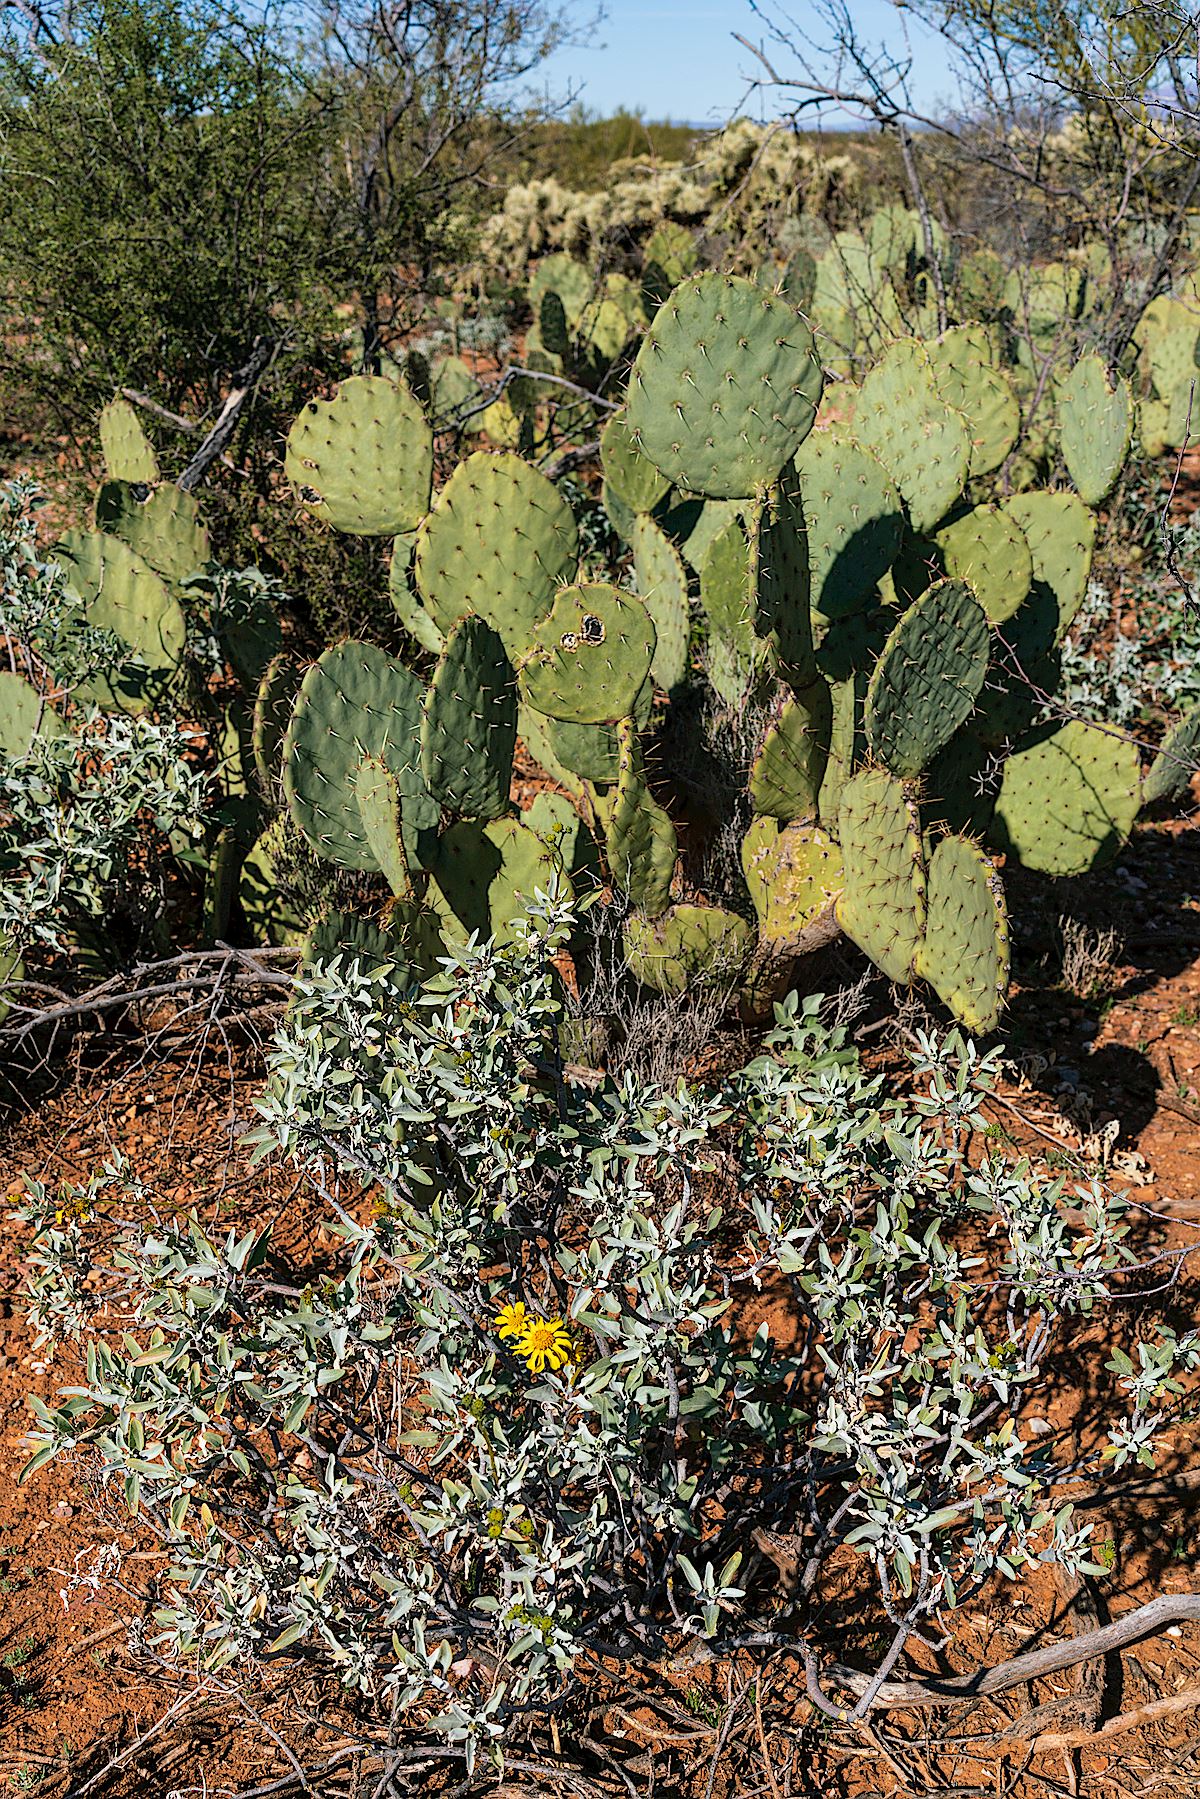 Red Sand, Prickly Pear and Brittle Bush. January 2019.